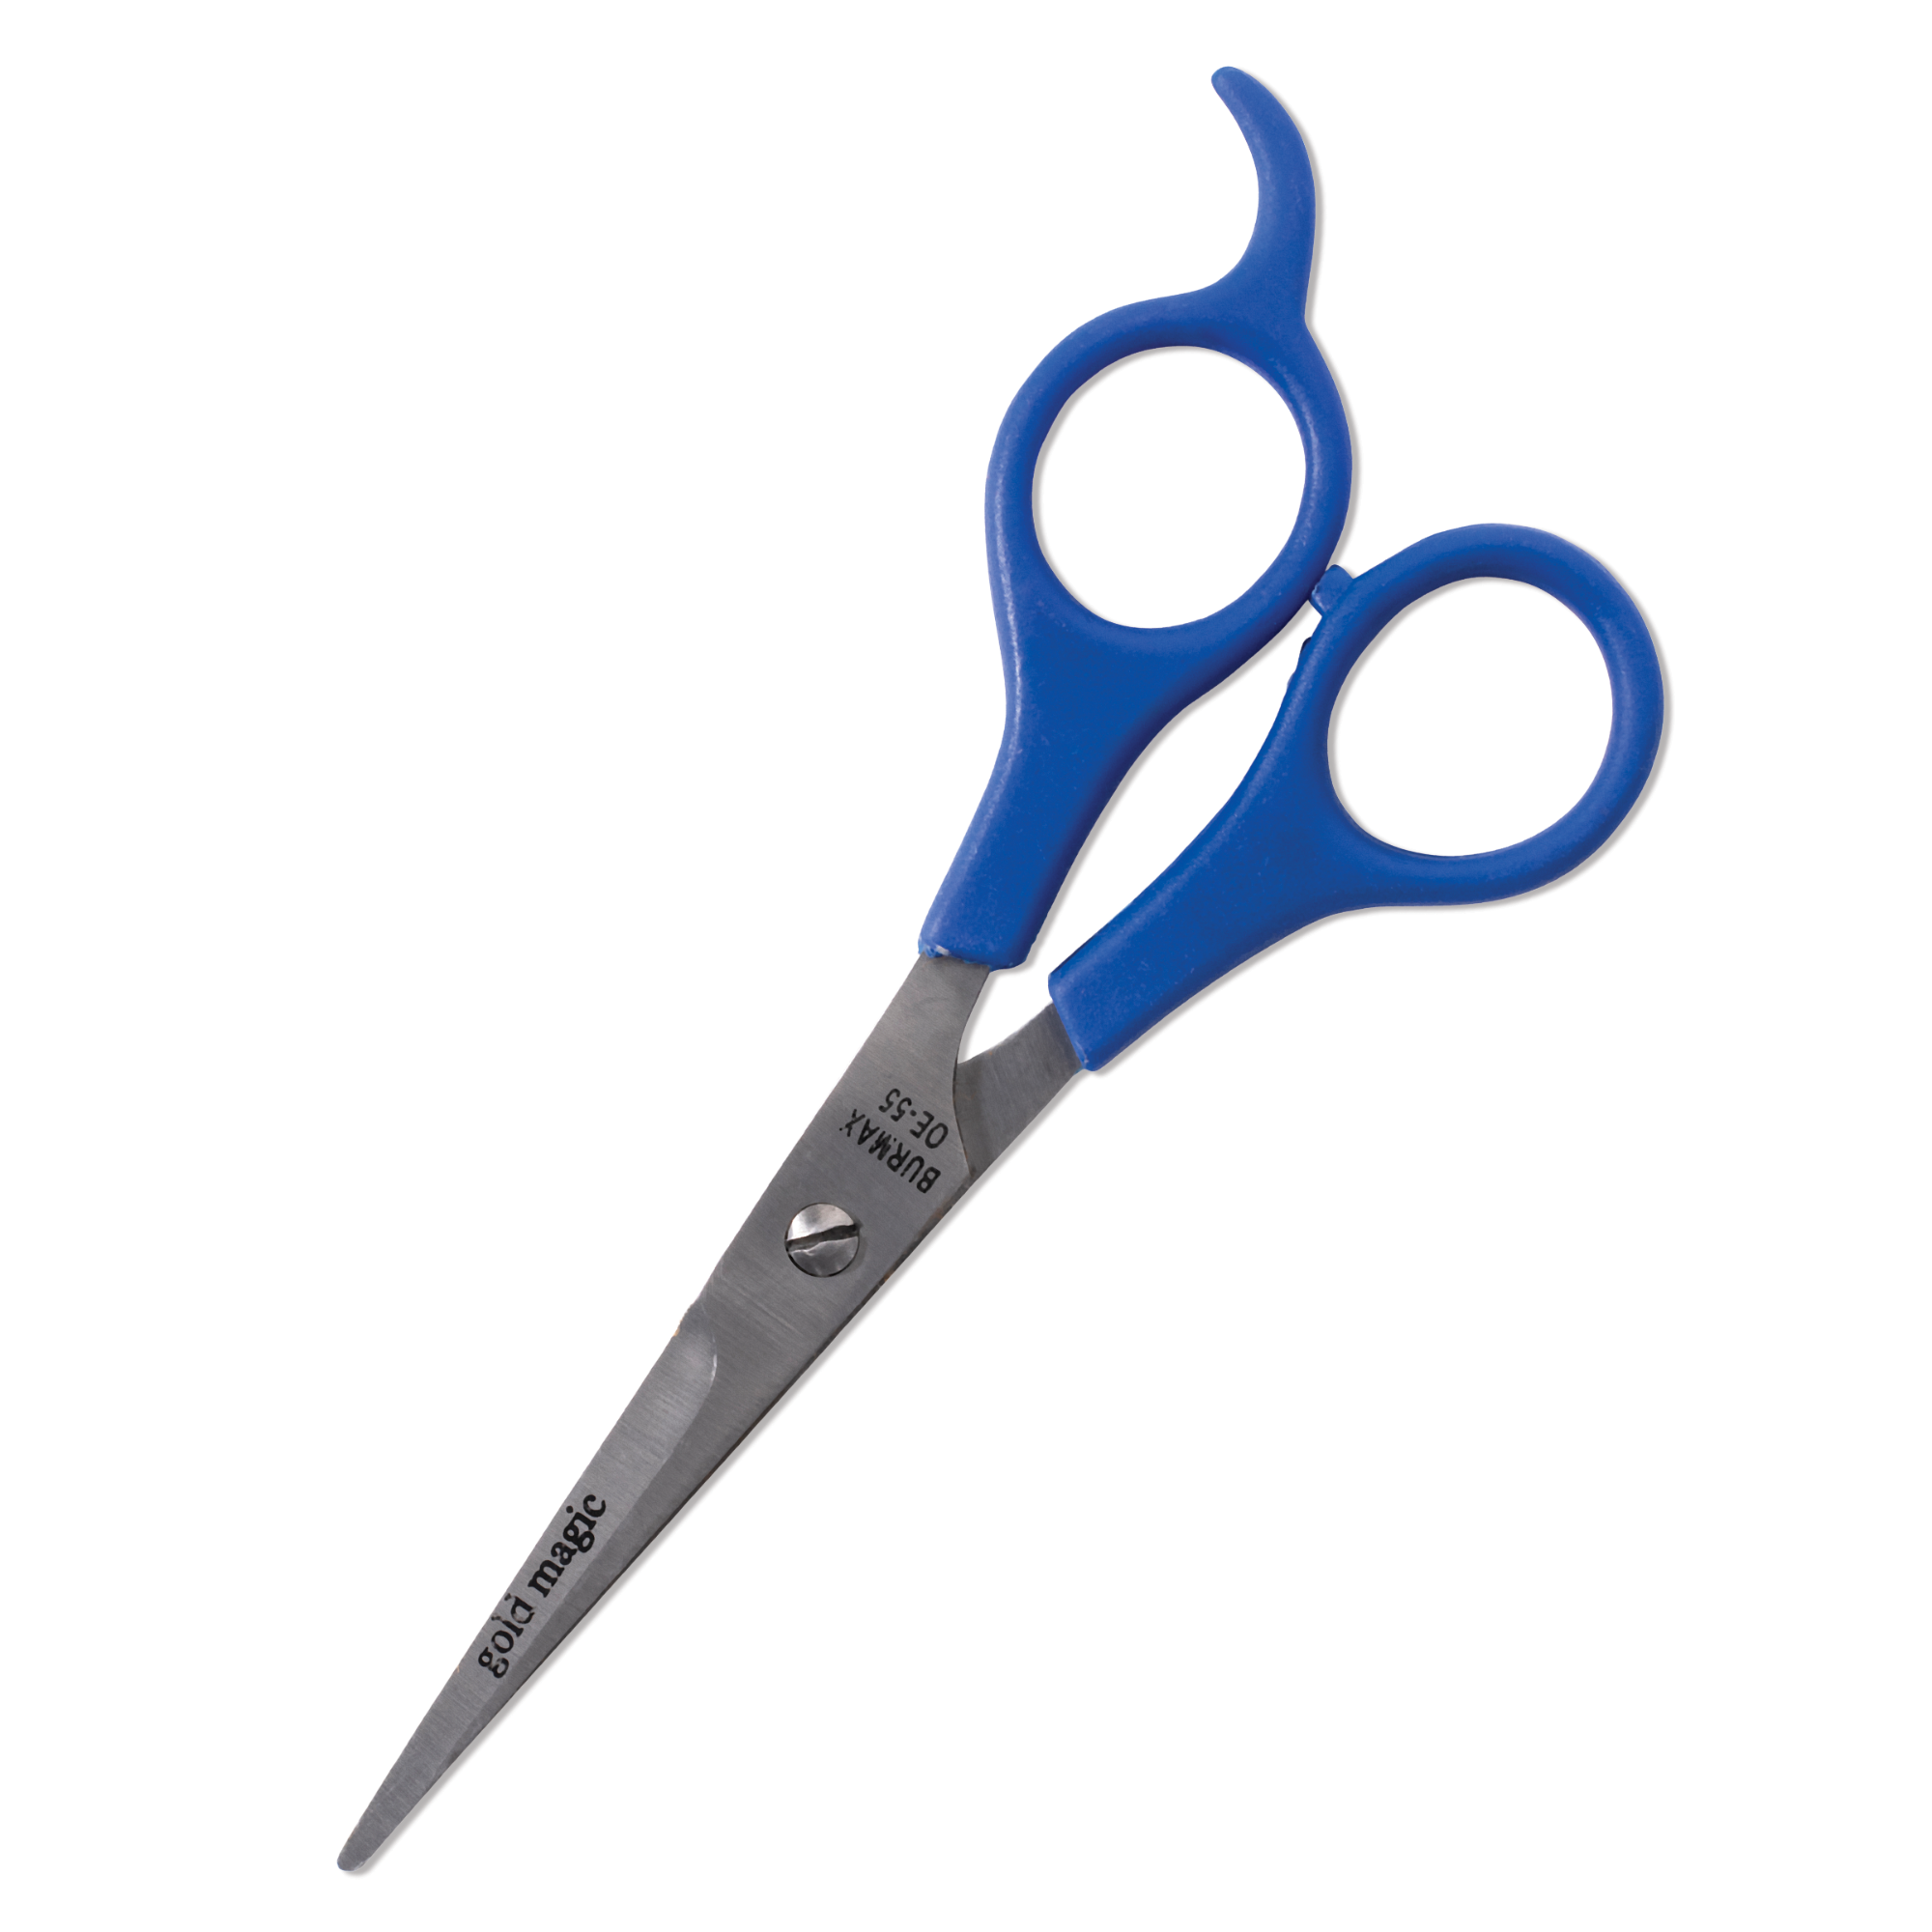 5-1/2" Stainless Steel Cutting Shear